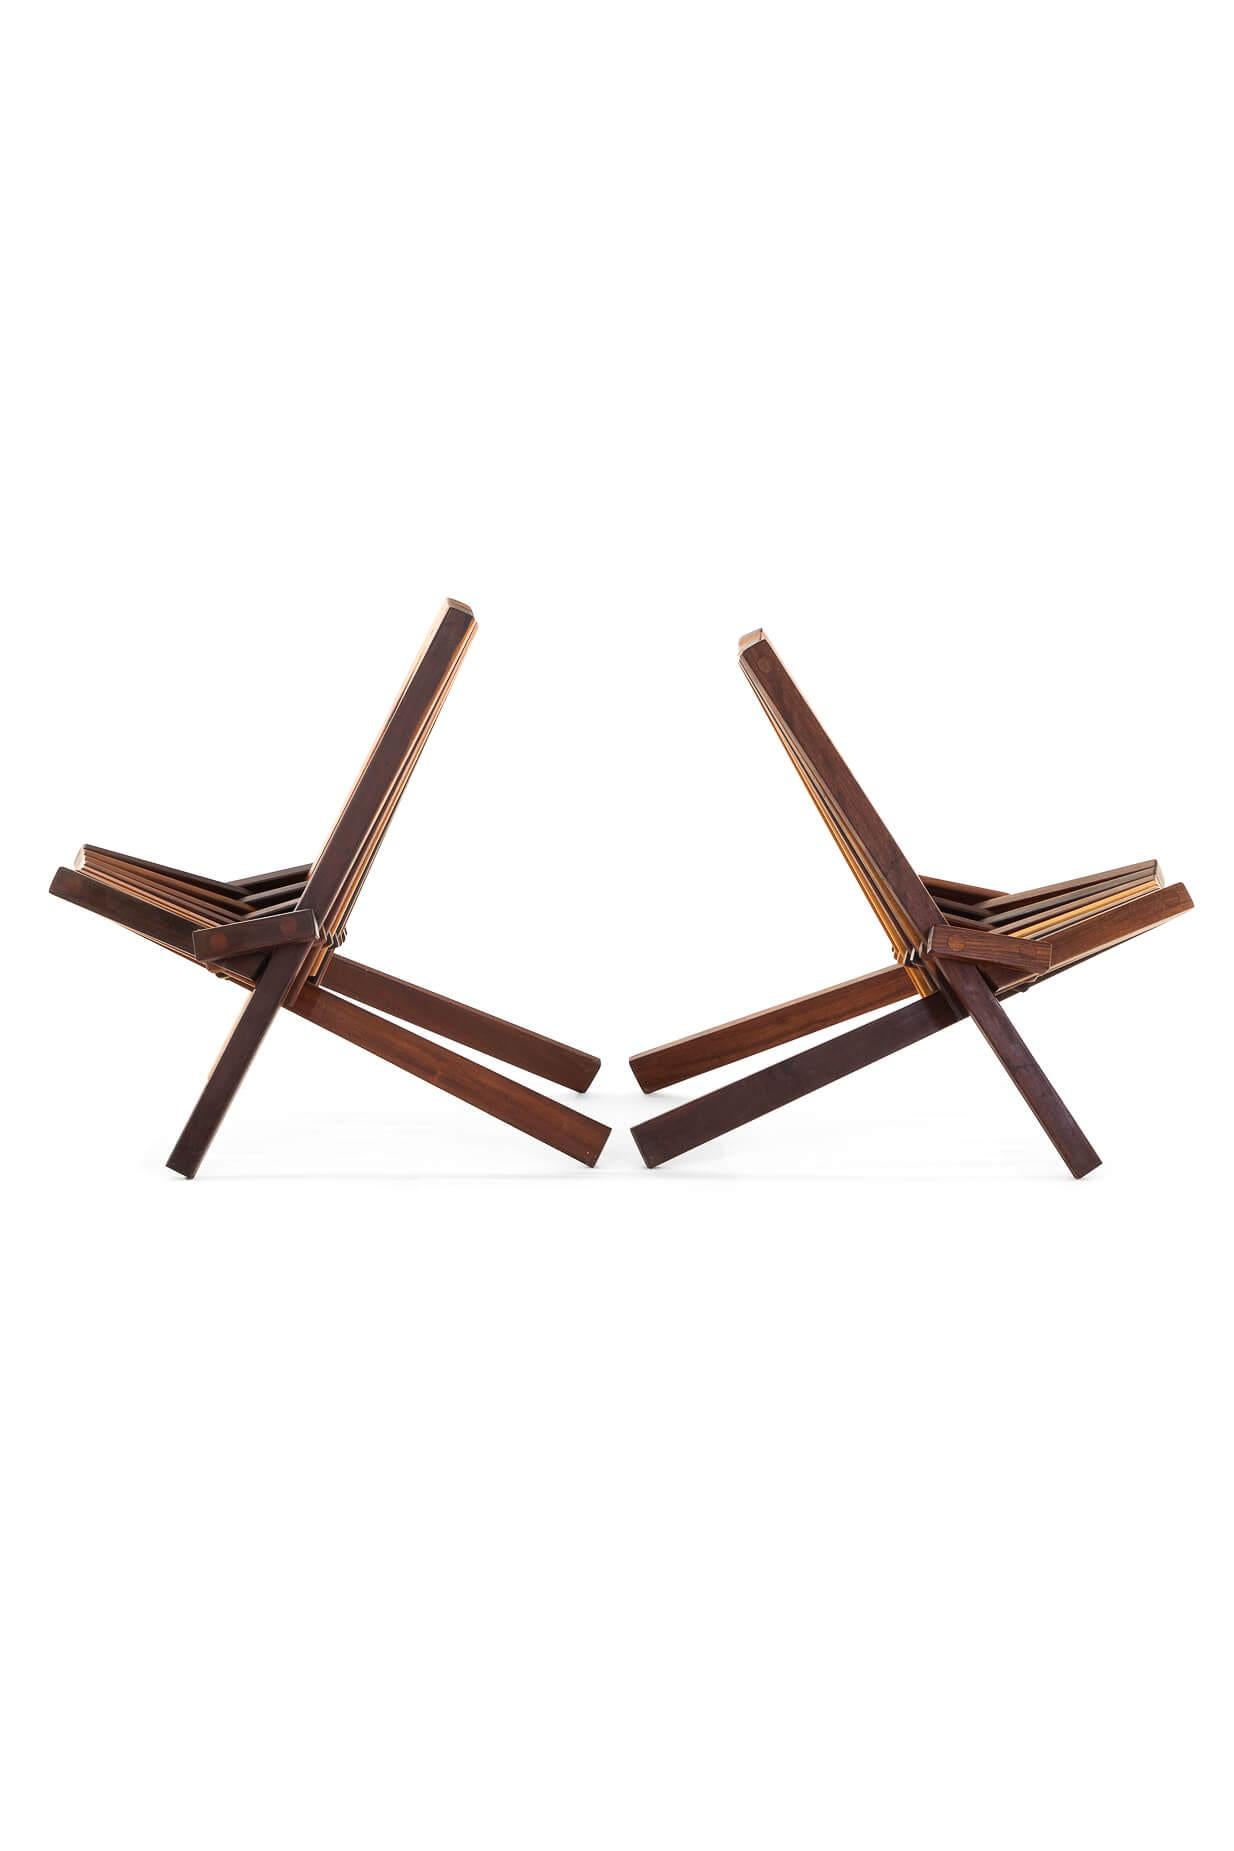 Hand-Crafted Pair of Scandinavian Folding Teak Chairs For Sale